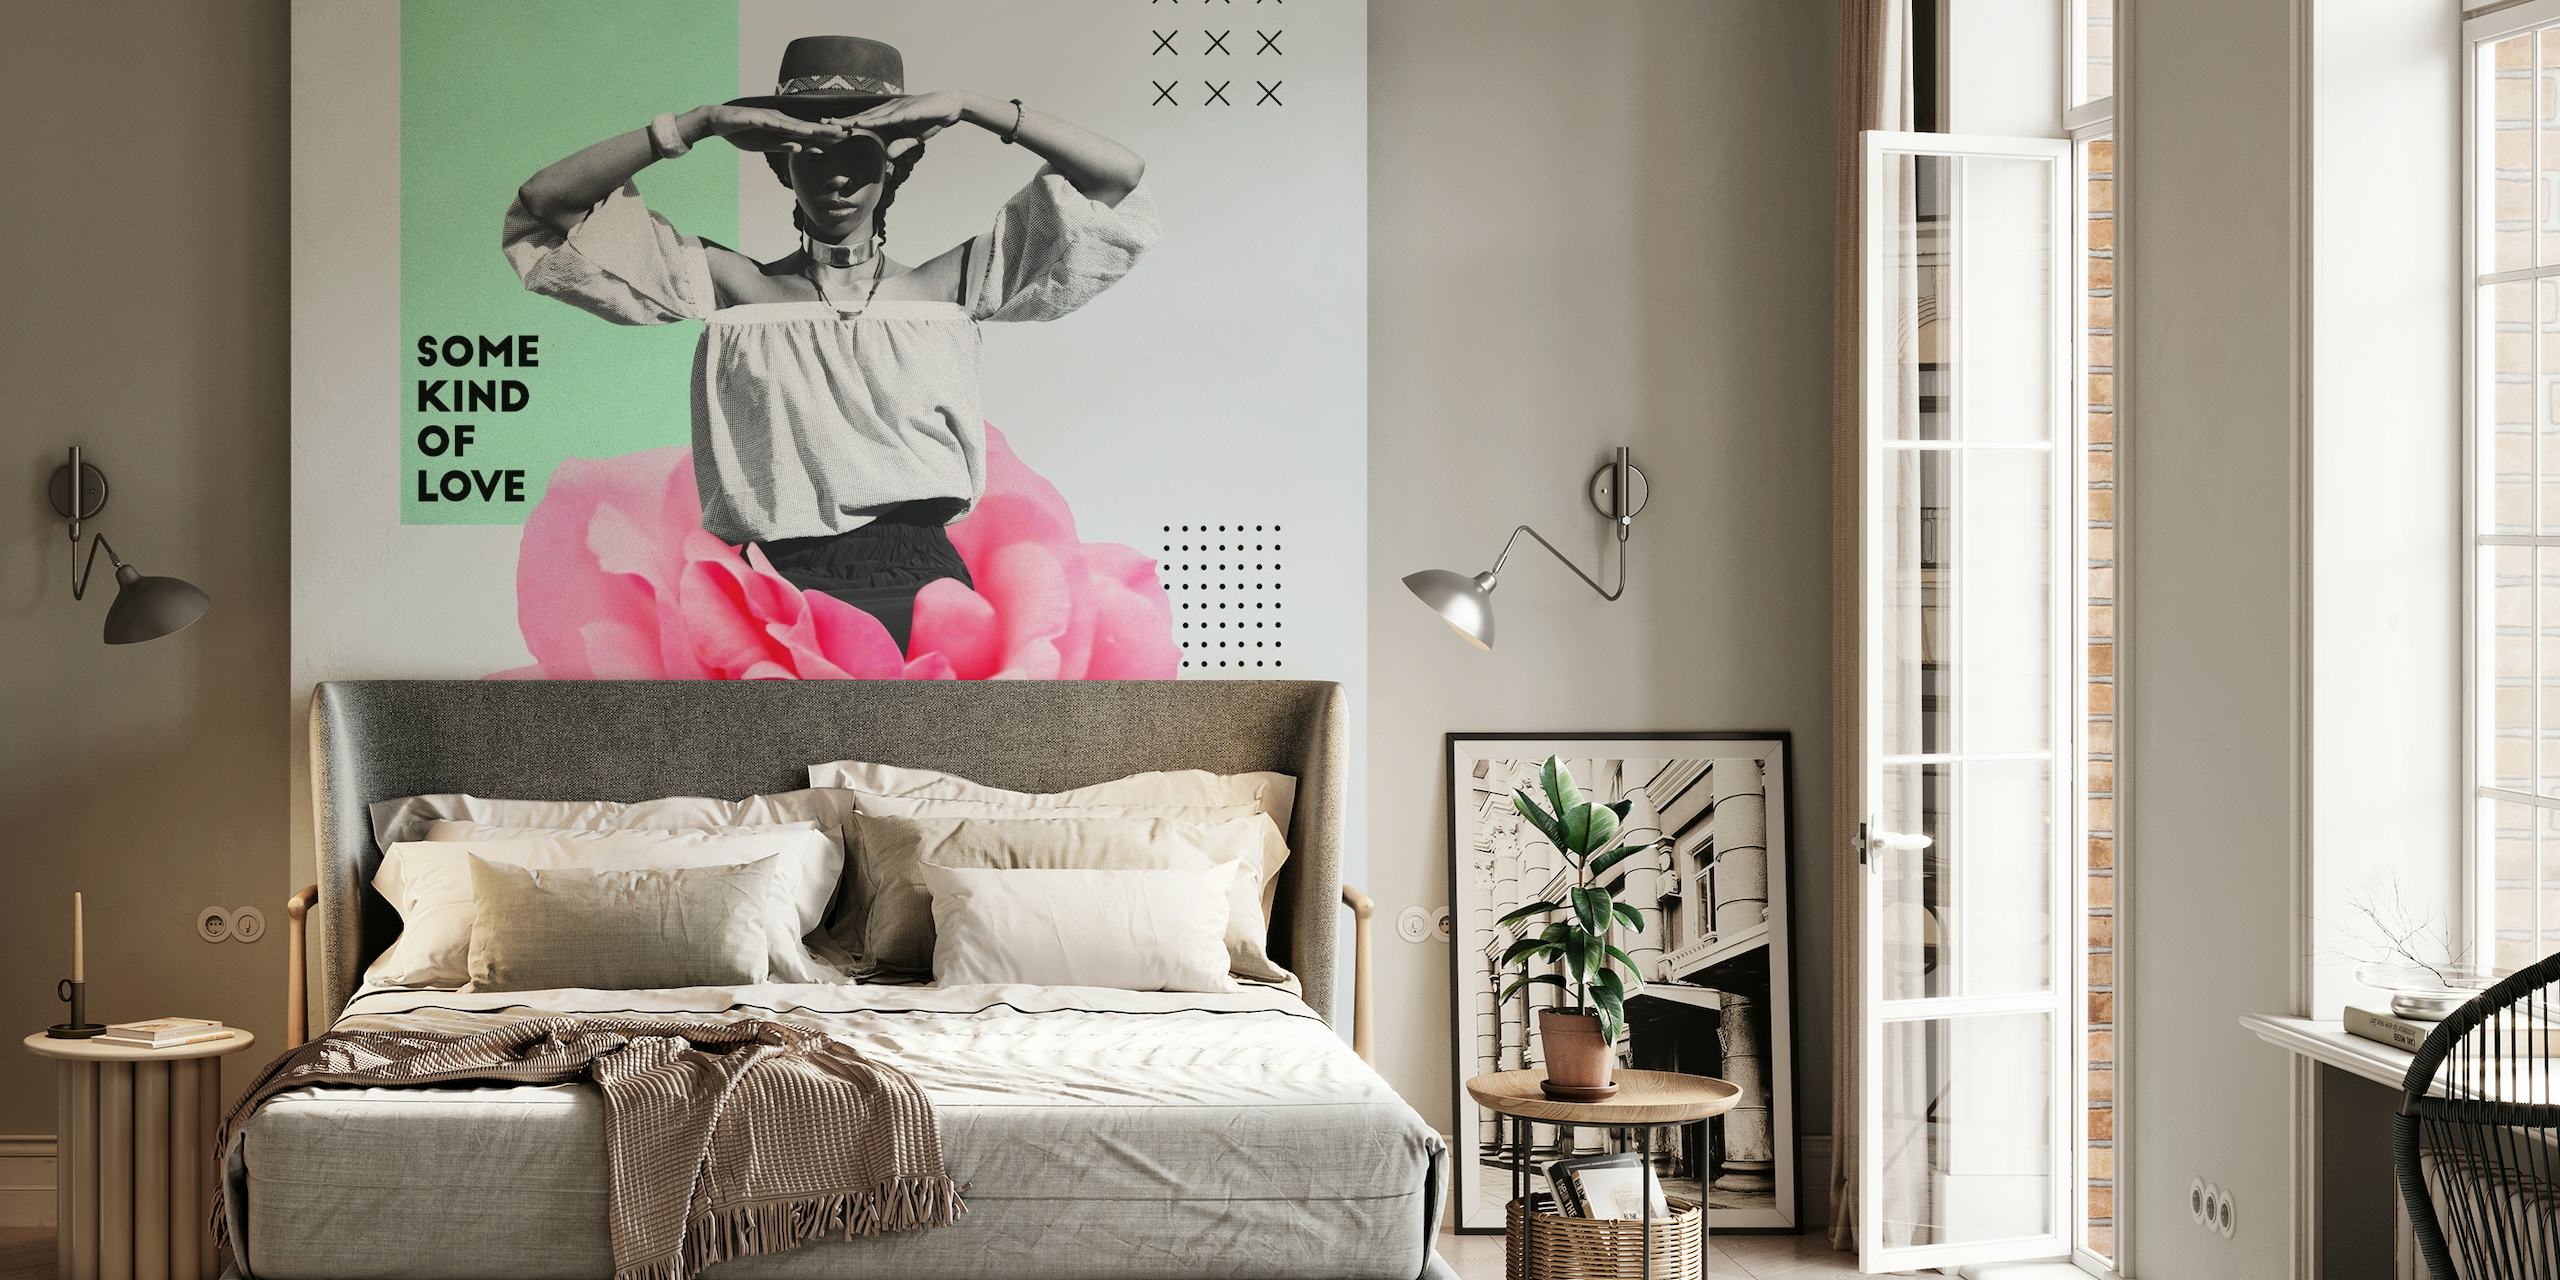 Boho Chic wall mural with a pink rose and a stylish figure against a modernistic background